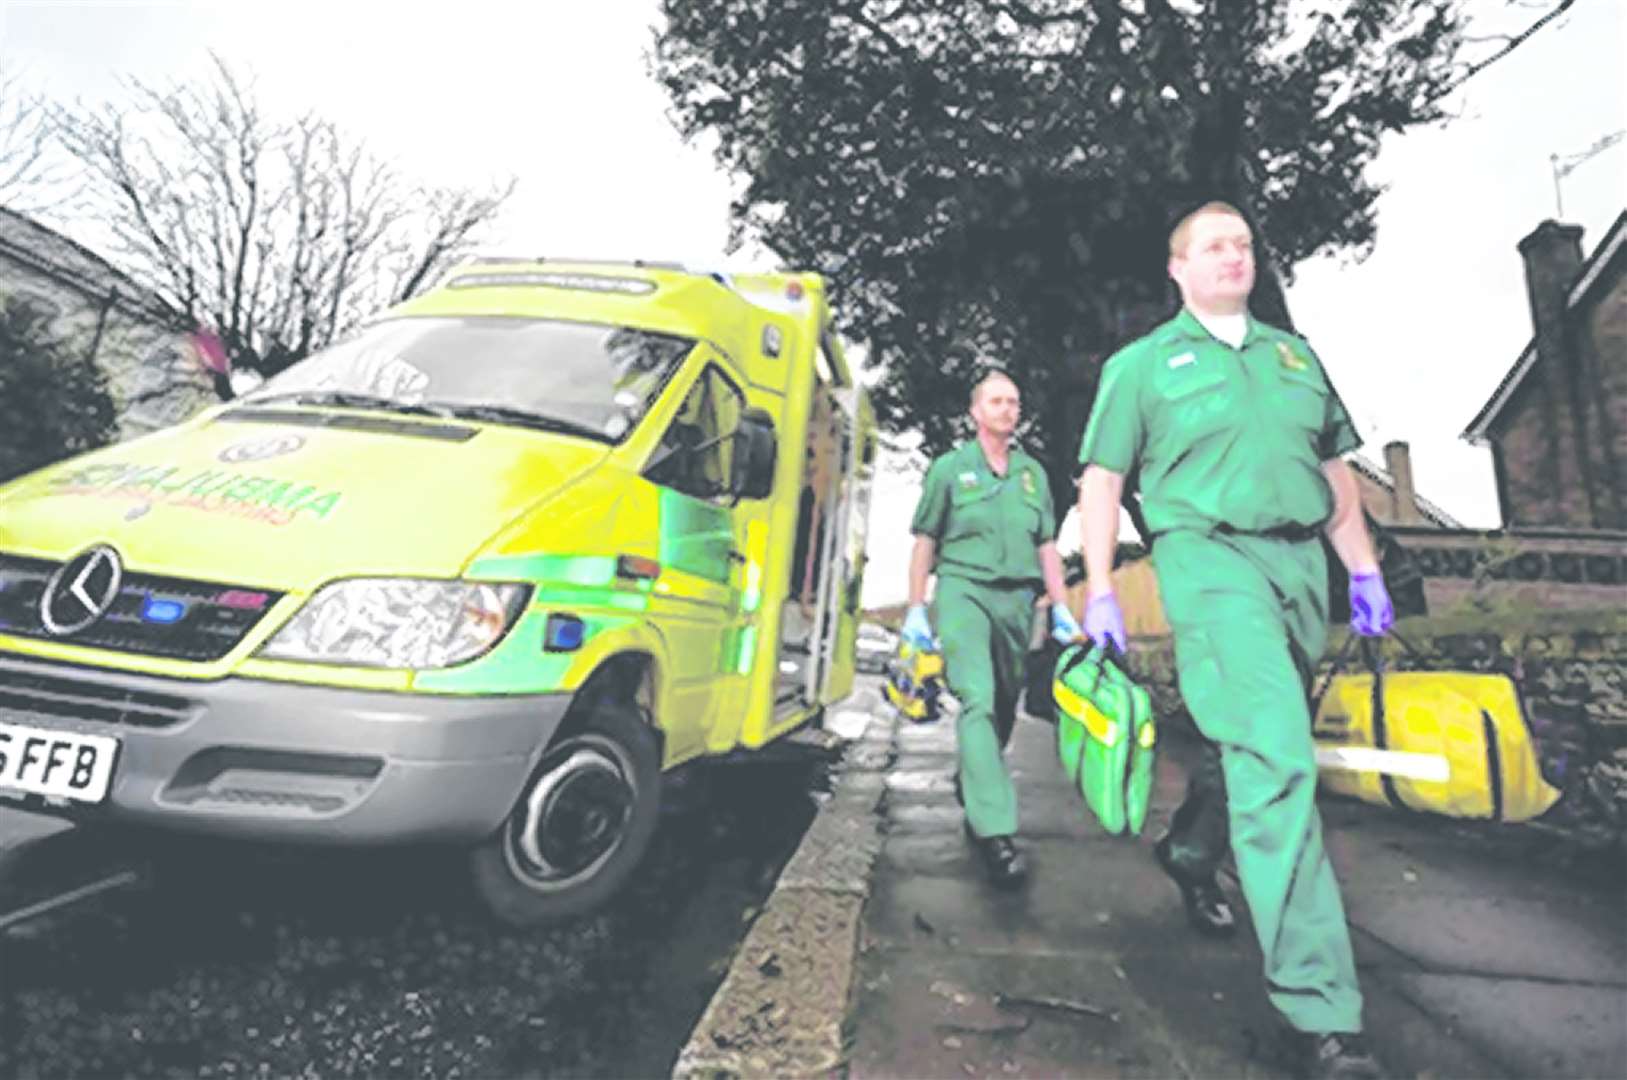 Trotter turned on an ambulance worker trying to treat him. Stock photo: South East Coast Ambulance Service